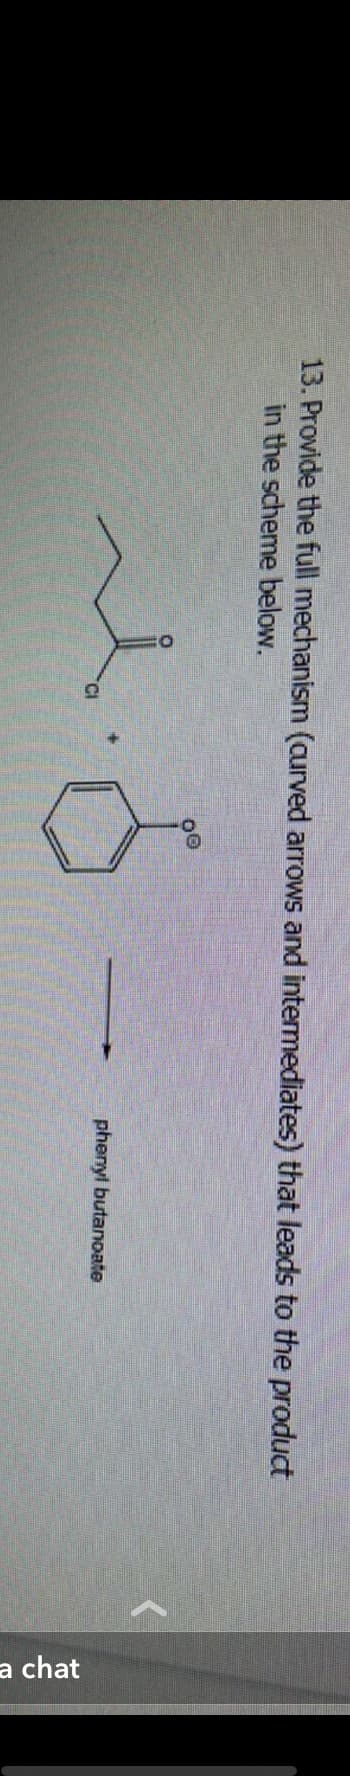 13. Provide the full mechanism (curved arrows and intermediates) that leads to the product
in the scheme below.
۸۰۰۵ه
phenyl butanoate
a chat